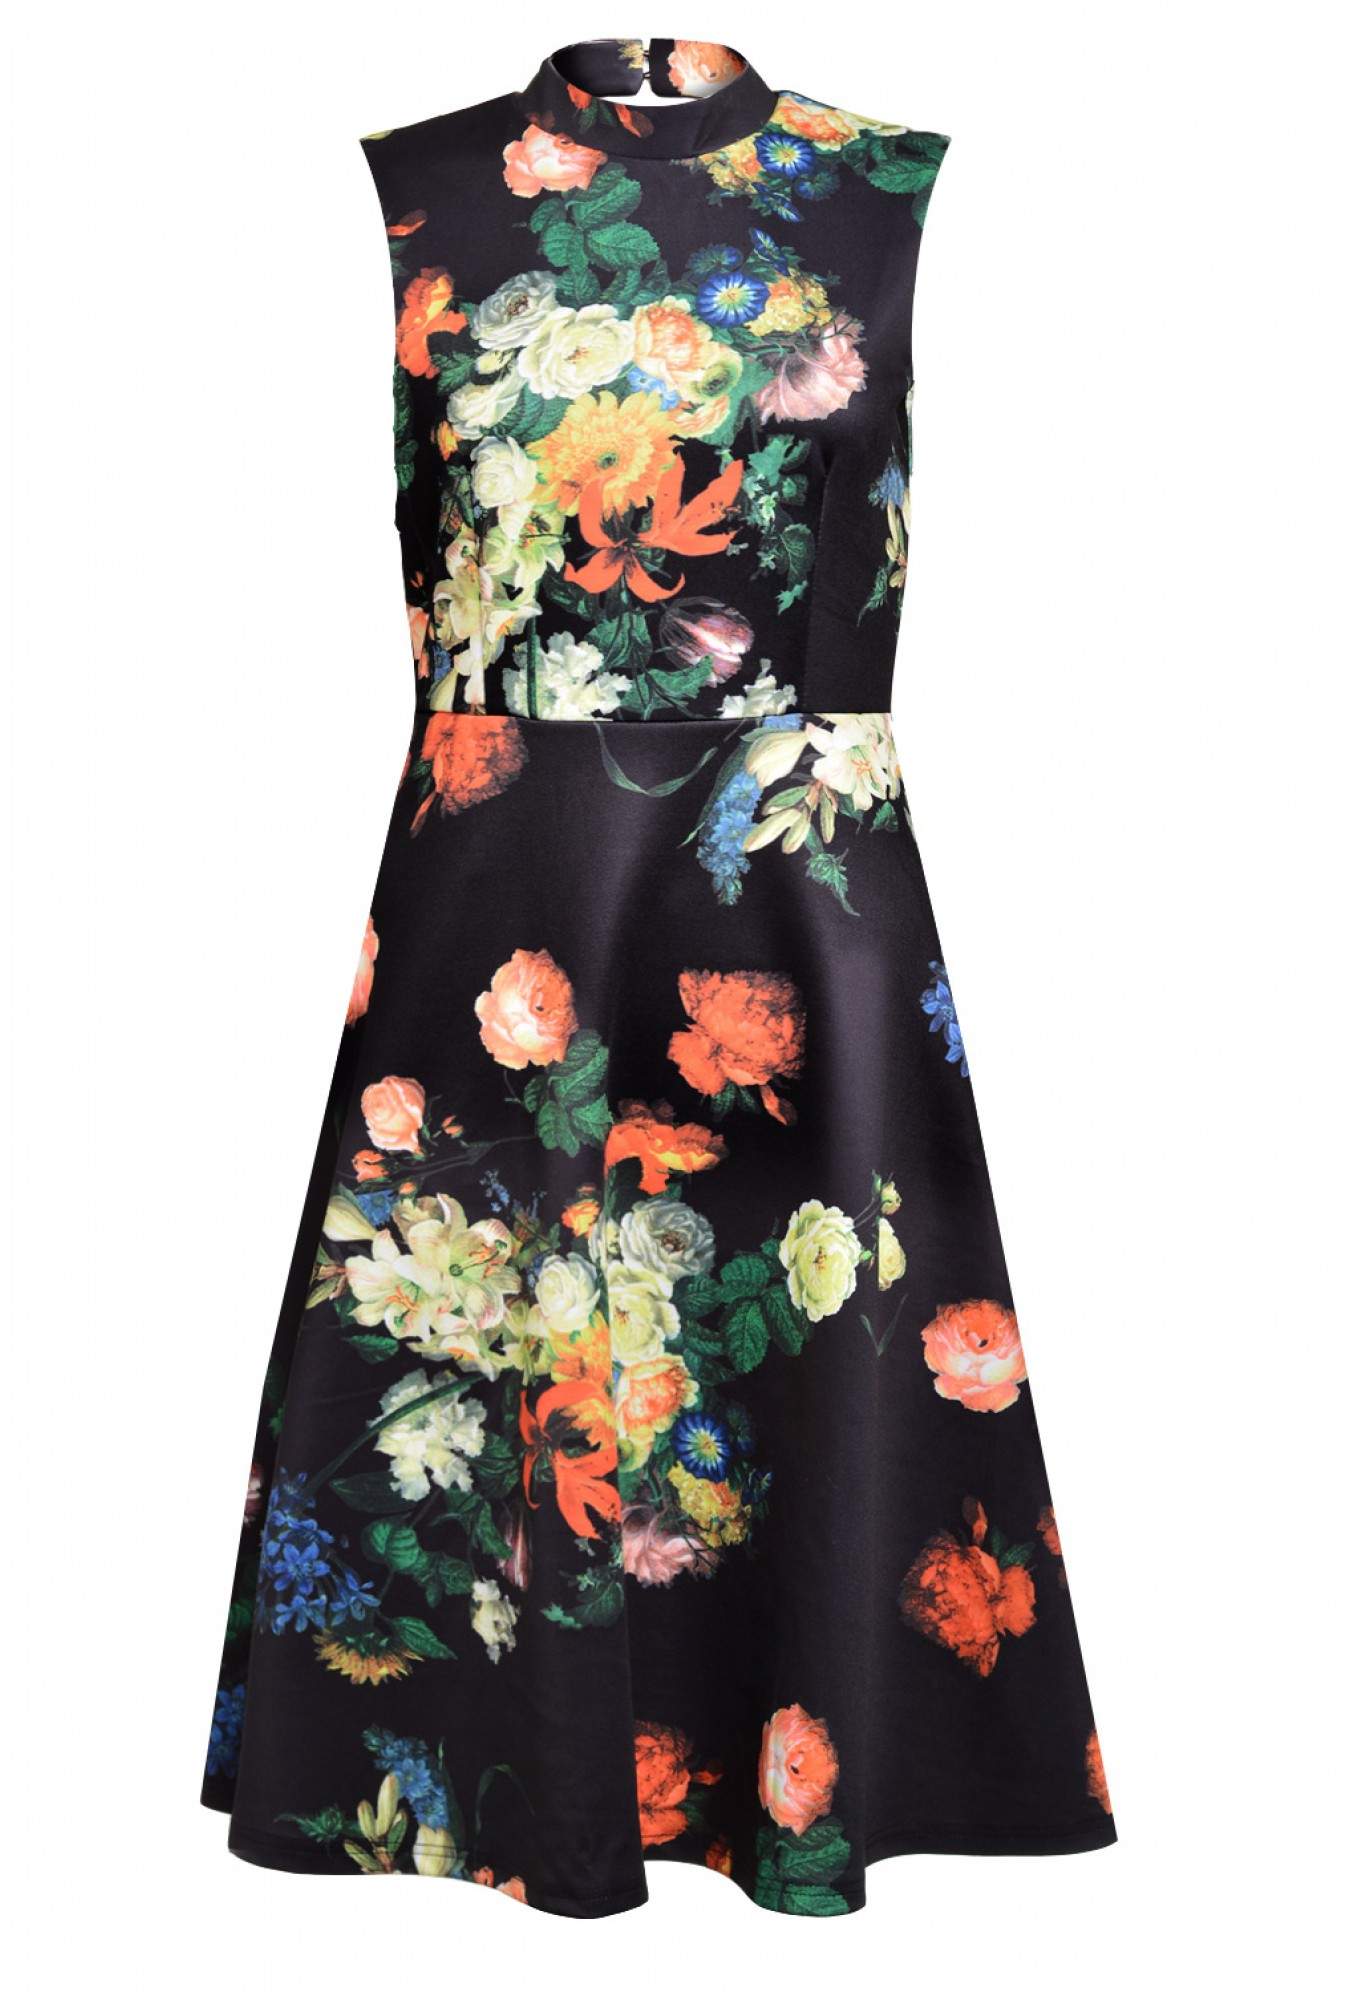 Marc Angelo Ann Floral High Neck Dress in Black | iCLOTHING